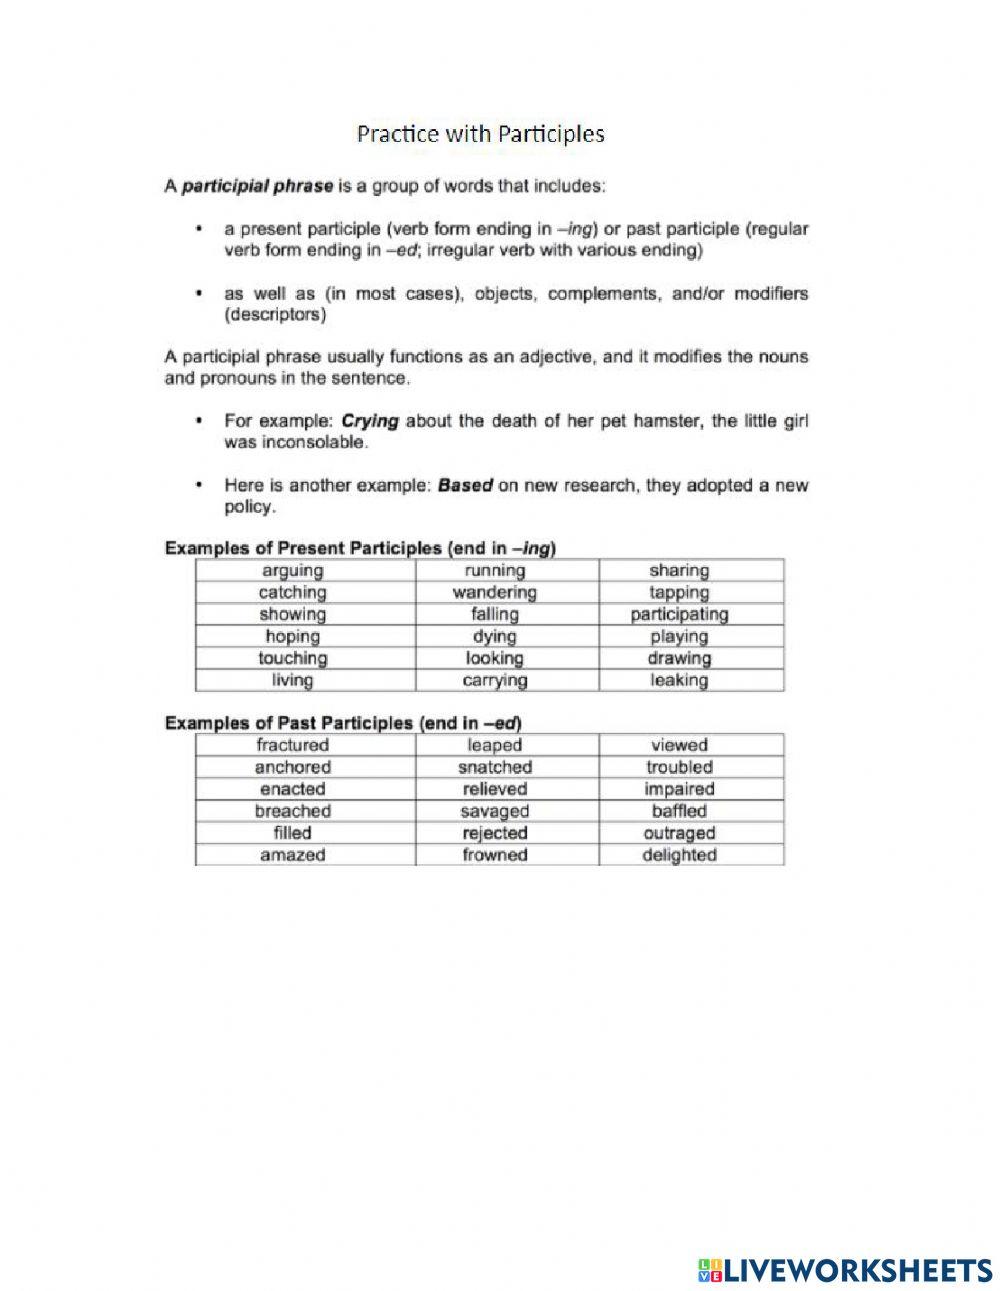 Practice with Participles